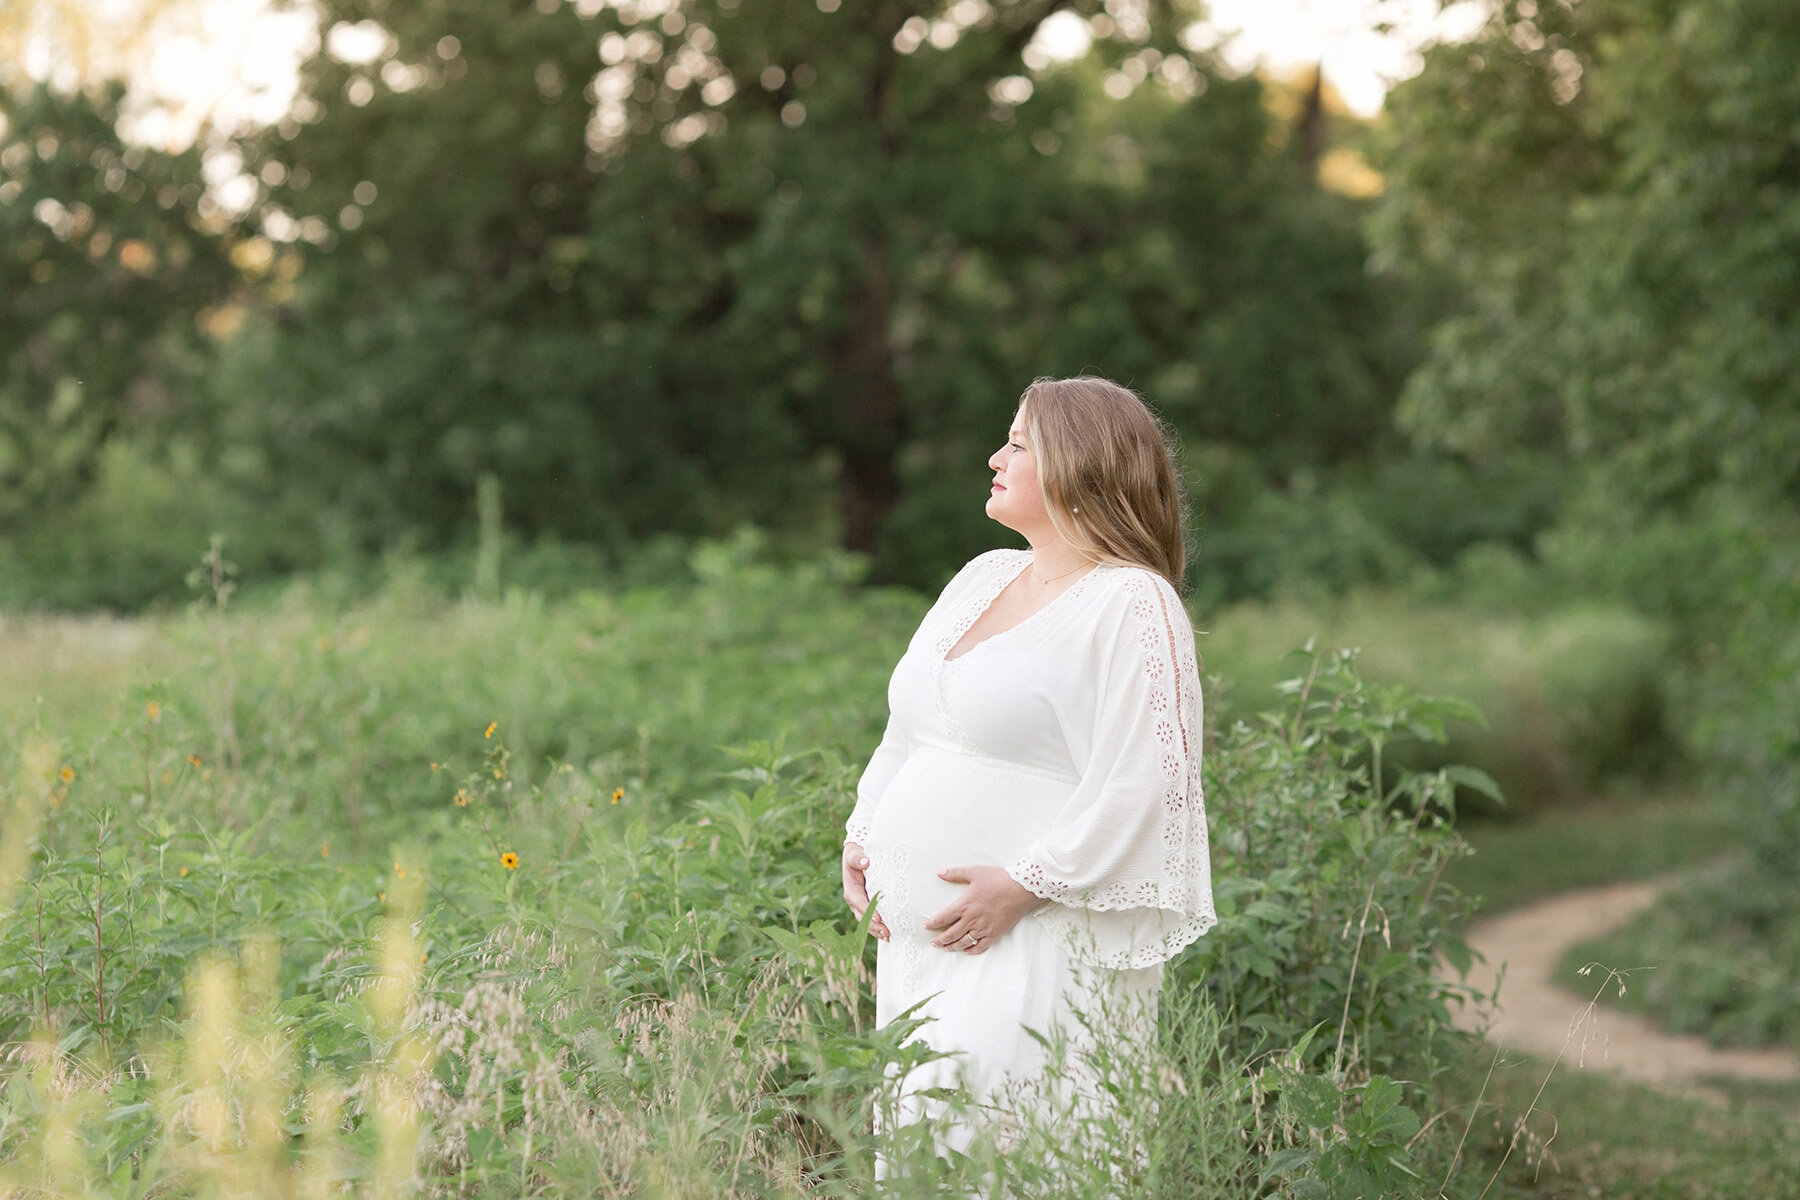 Louisville KY Maternity Photographer | Julie Brock Photography | Outdoor Photo Session | Newborn Photographer Louisville KY | Field Session Family Photographer | beautiful white dress for maternity photo session.jpg